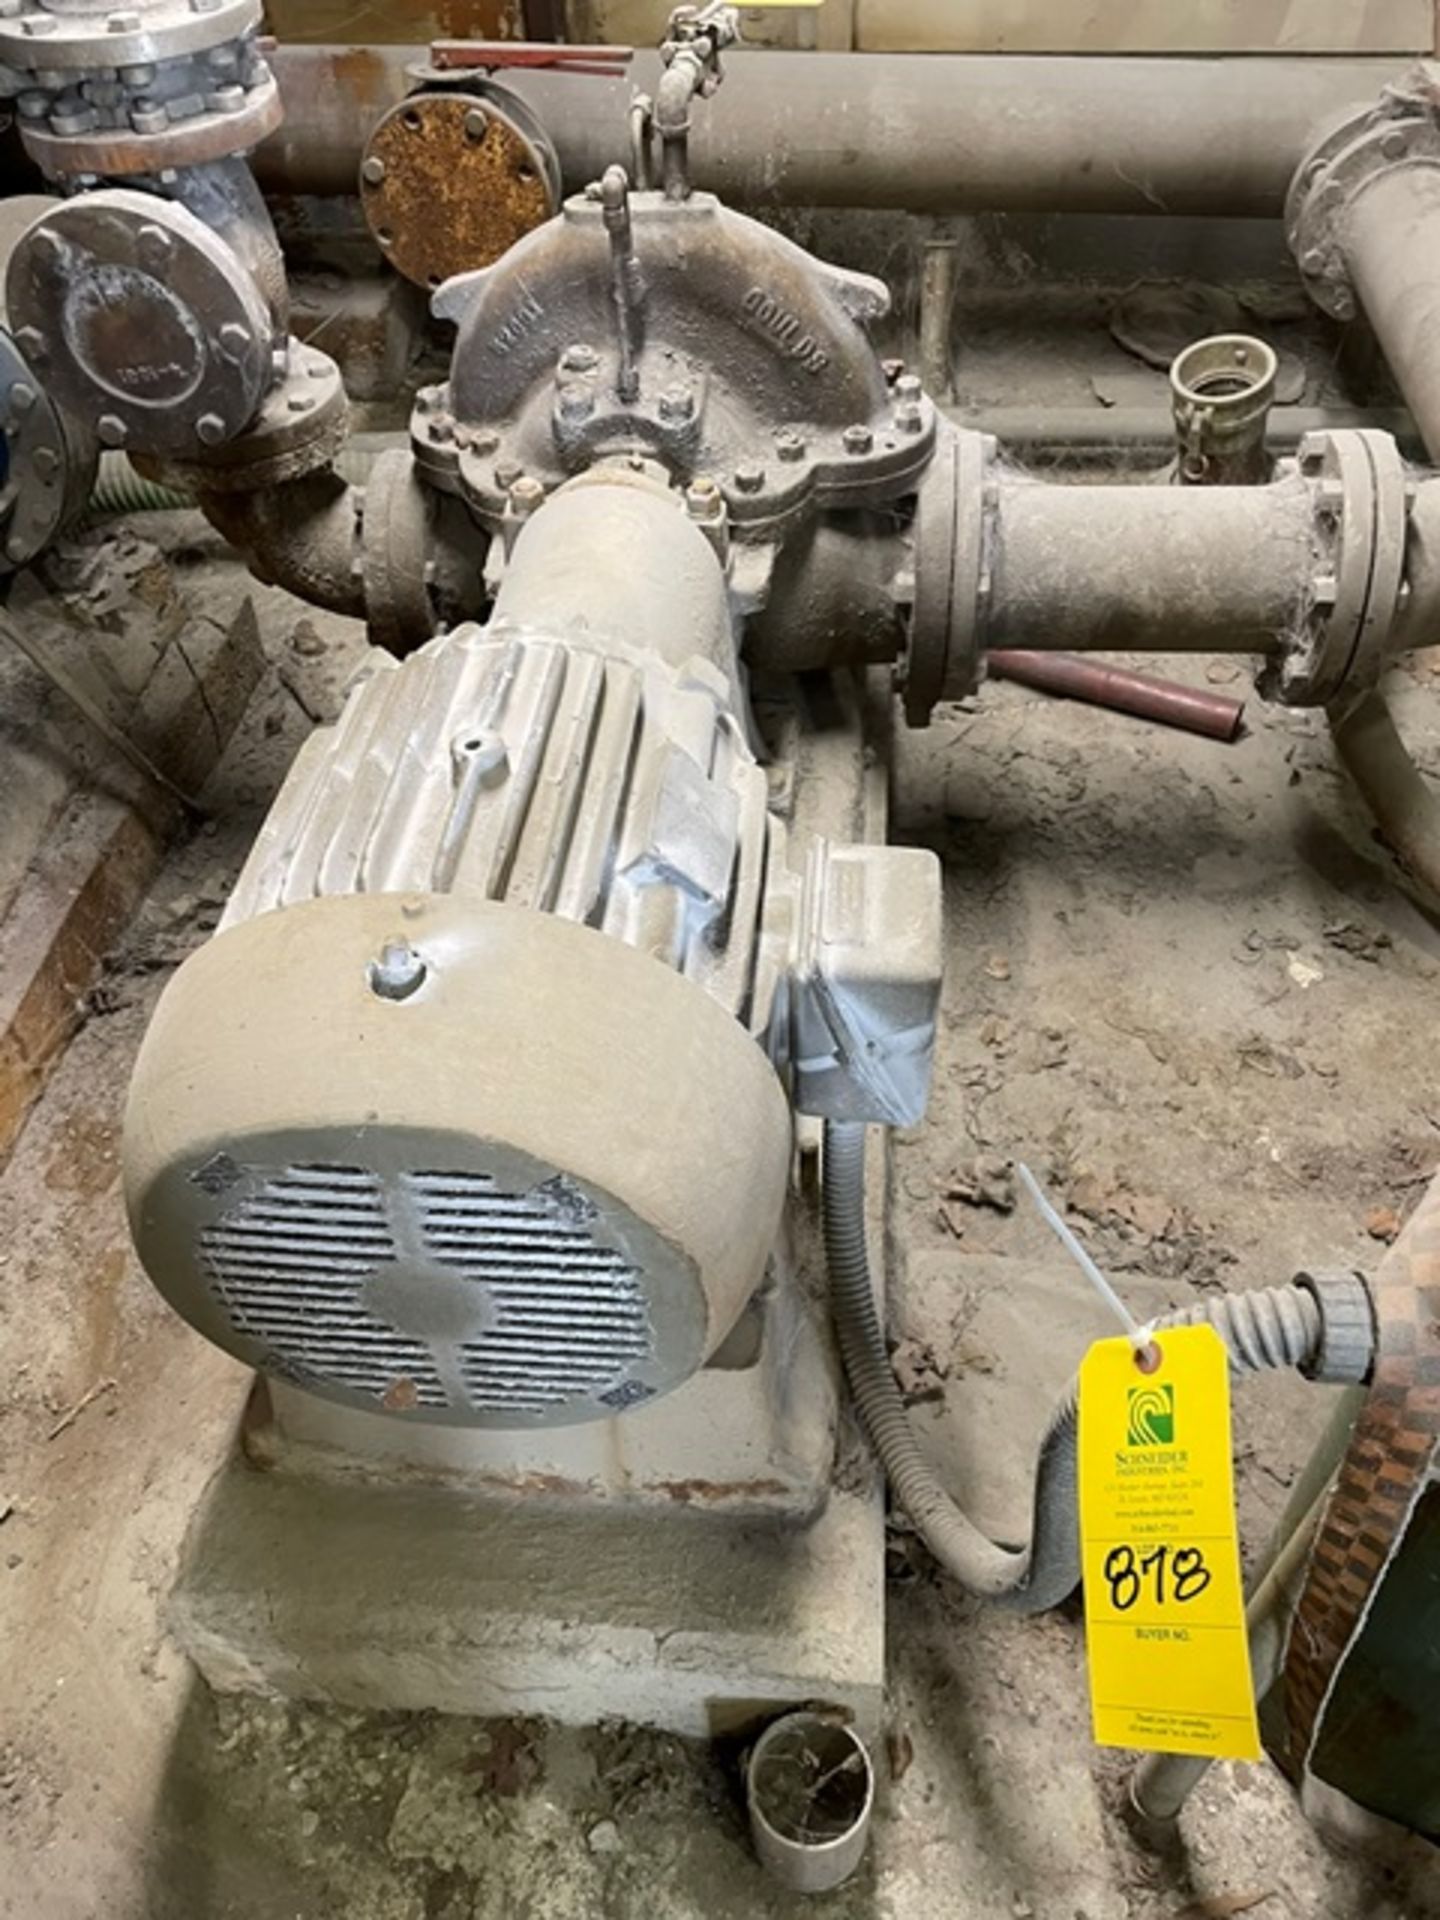 Reliance 25 HP Motor & Goulds Pump., Rigging & Loading Fee: $300